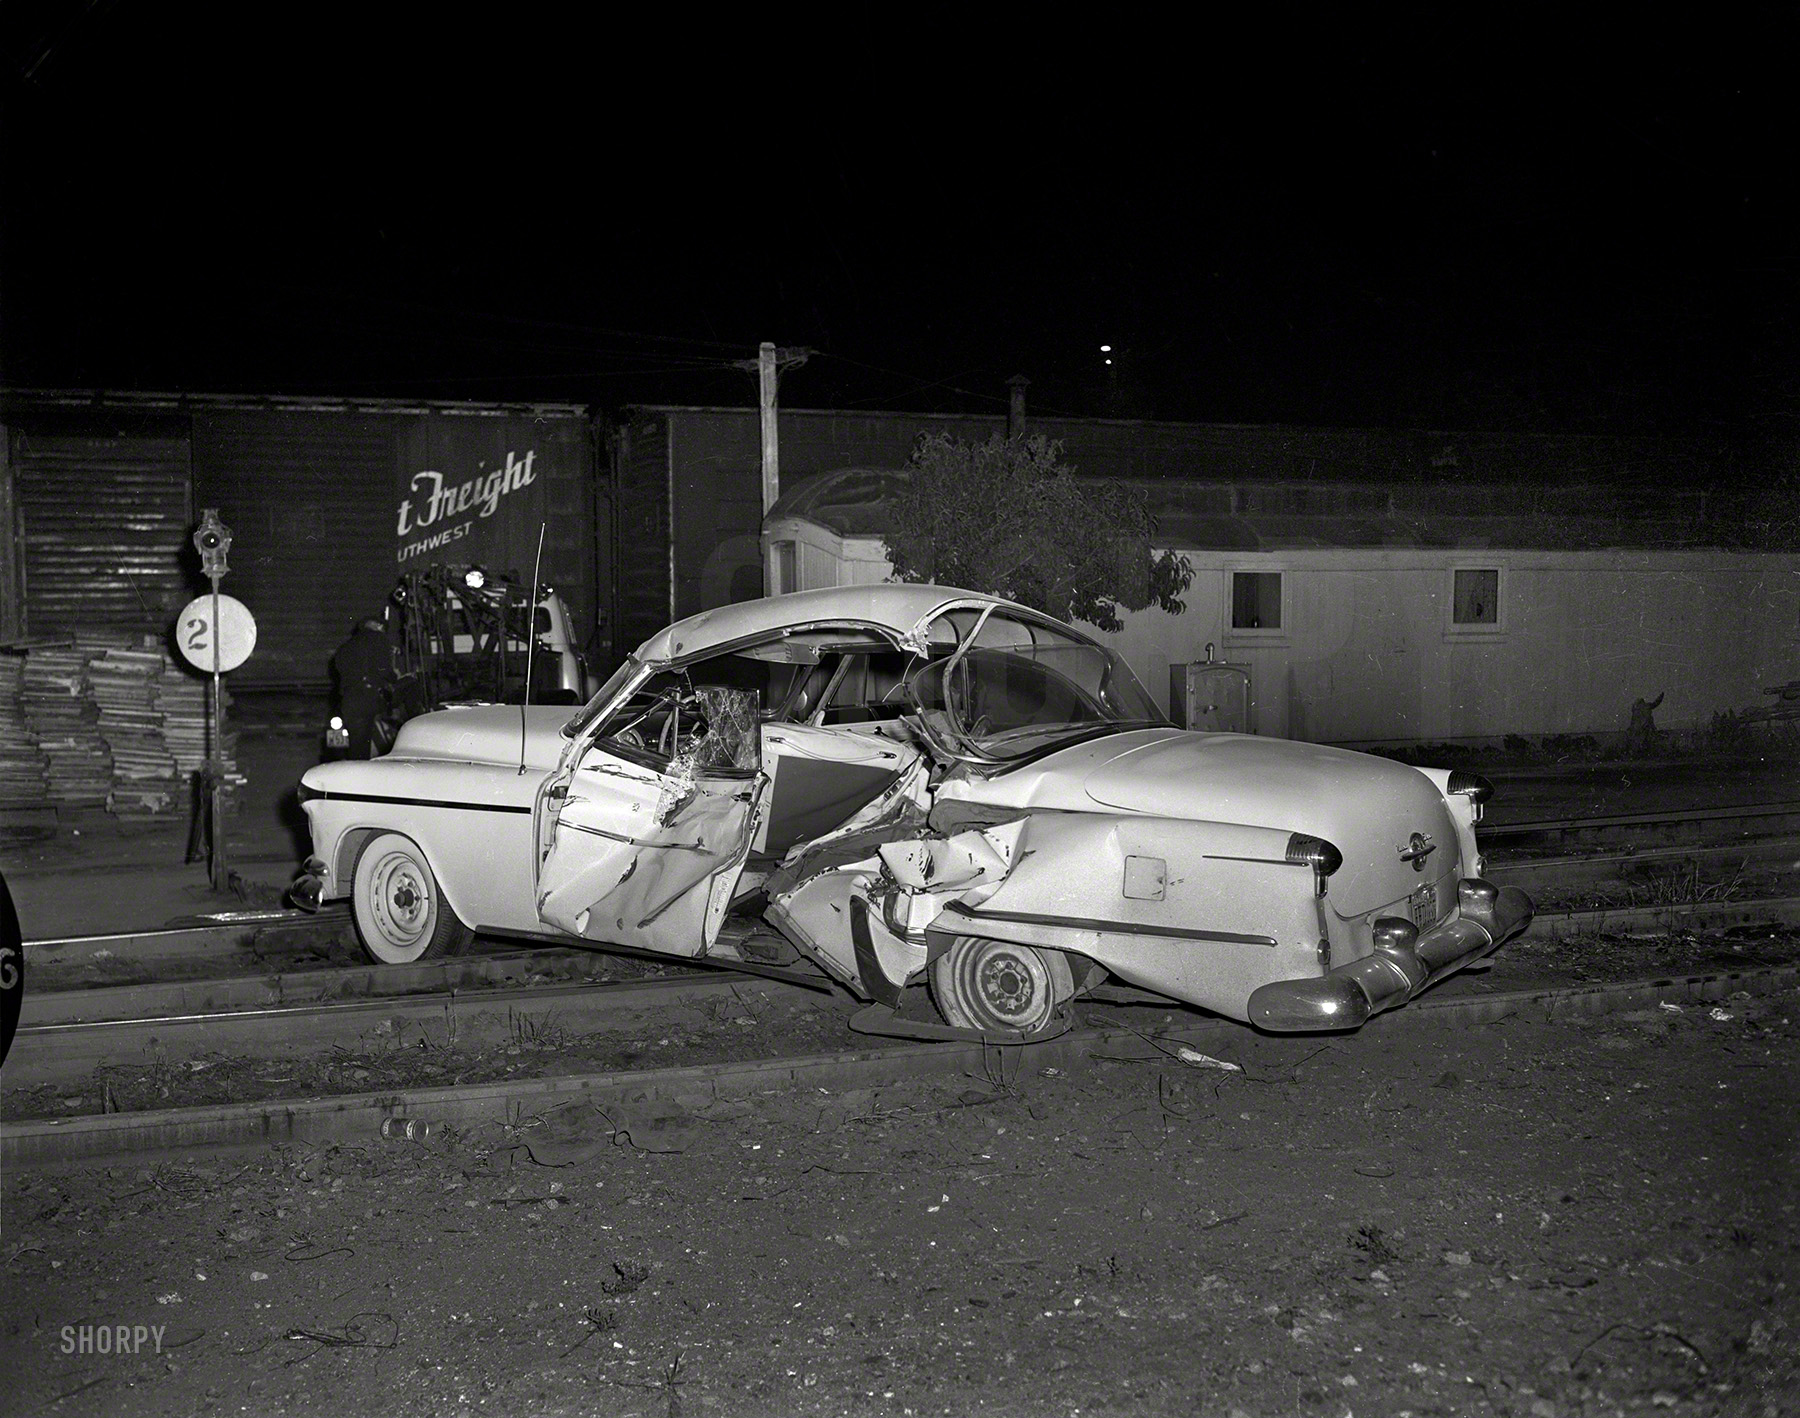 Oakland, 1957. "Accident on tracks." Note the beer can next to the rail, and let's be careful out there. 4x5 acetate negative from the News Archive. View full size.